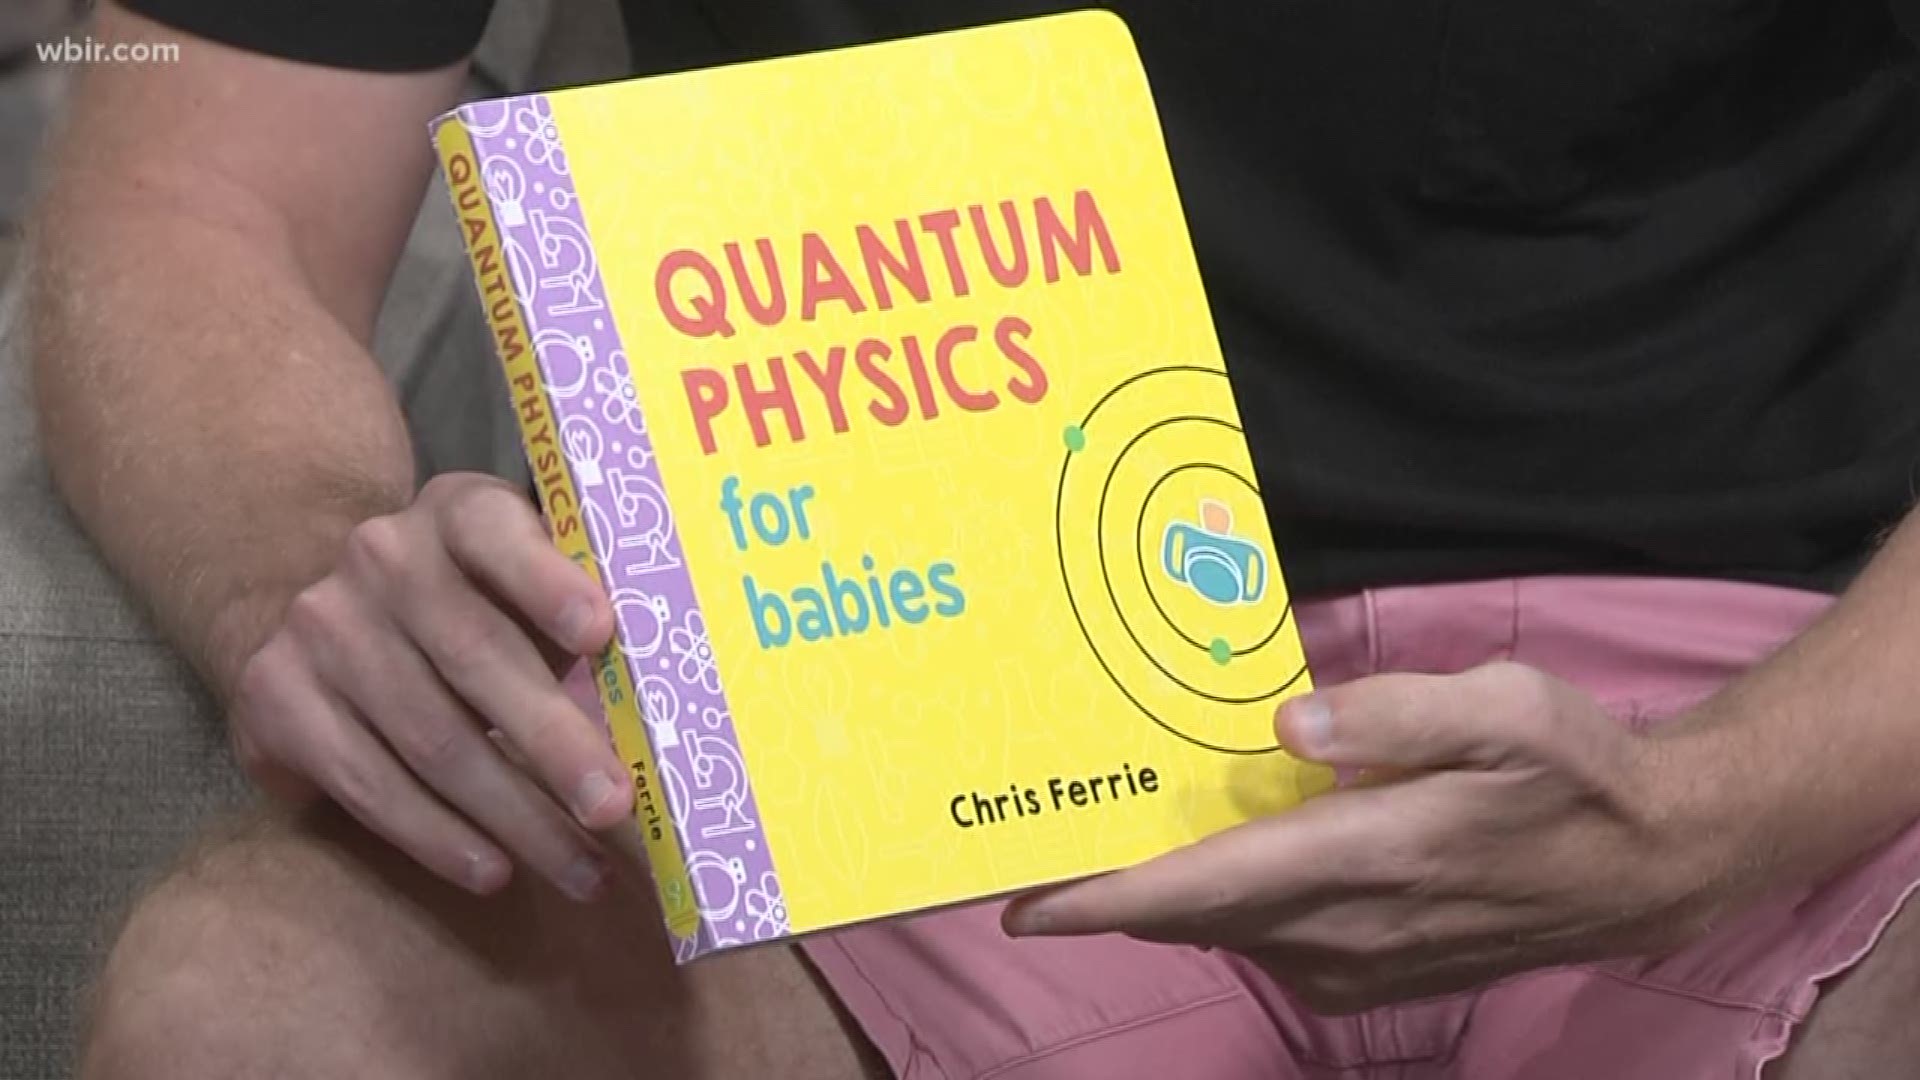 Author/scientist Chris Ferrie's books teaches children science including quantum physics and Newton's laws of motion.